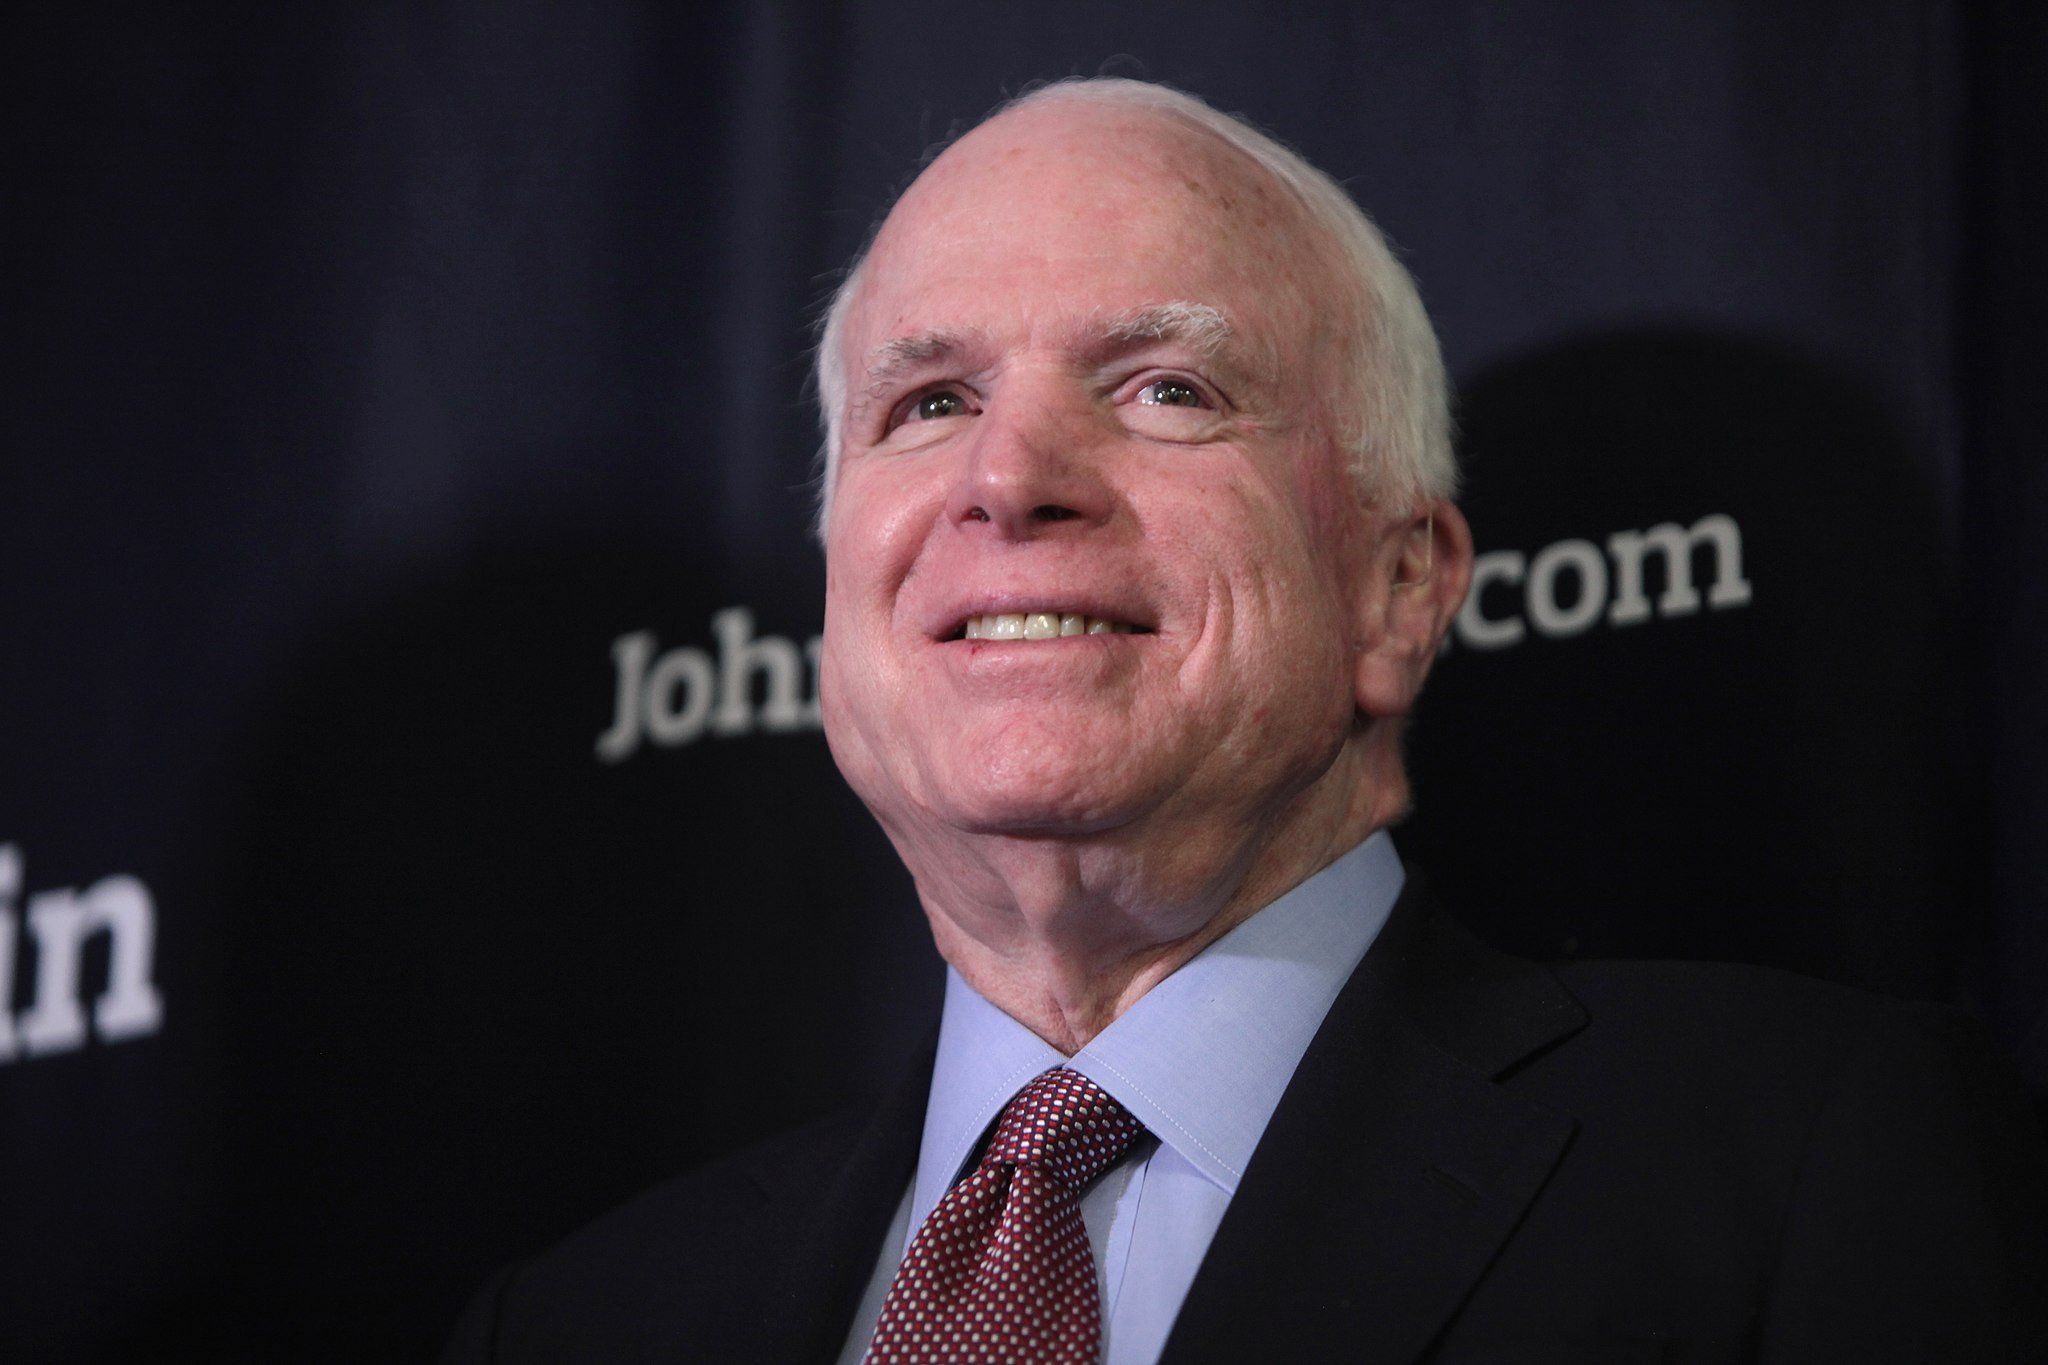 John mccain calls wife a cunt Quality Adult free site compilation Adult Pic Hq